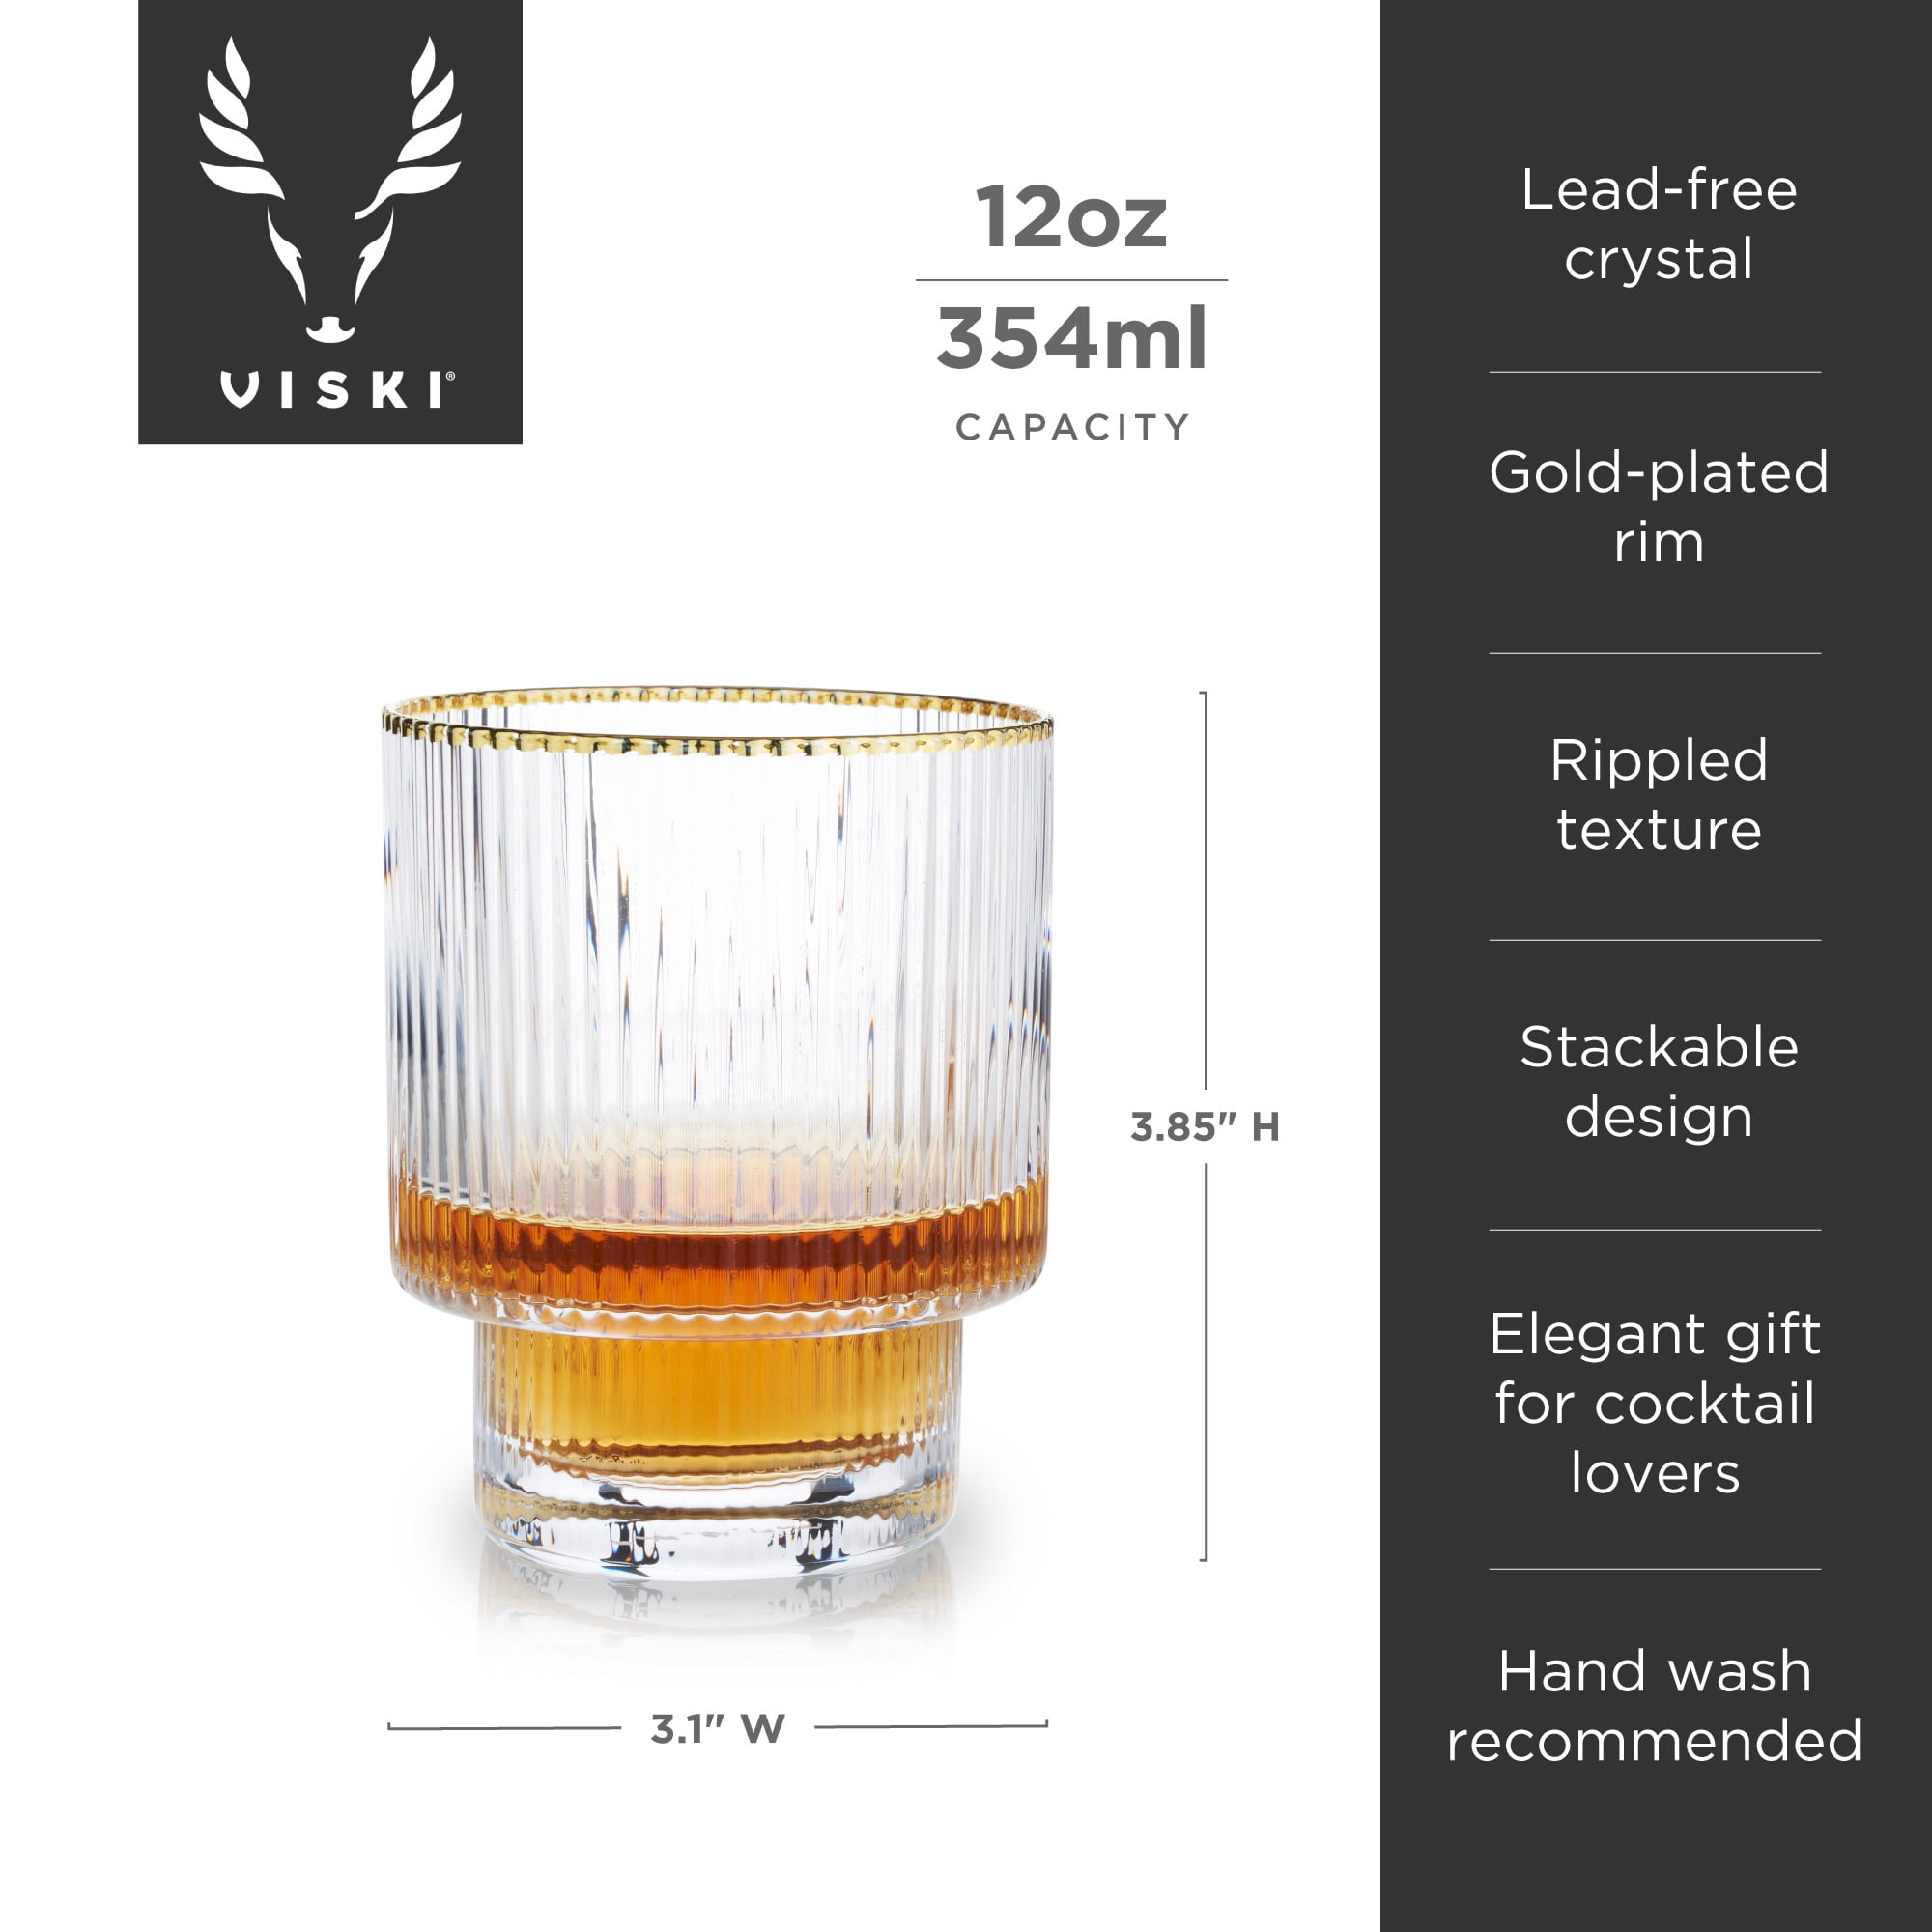 Glass Lined Whiskey Glass - The Salty Palm